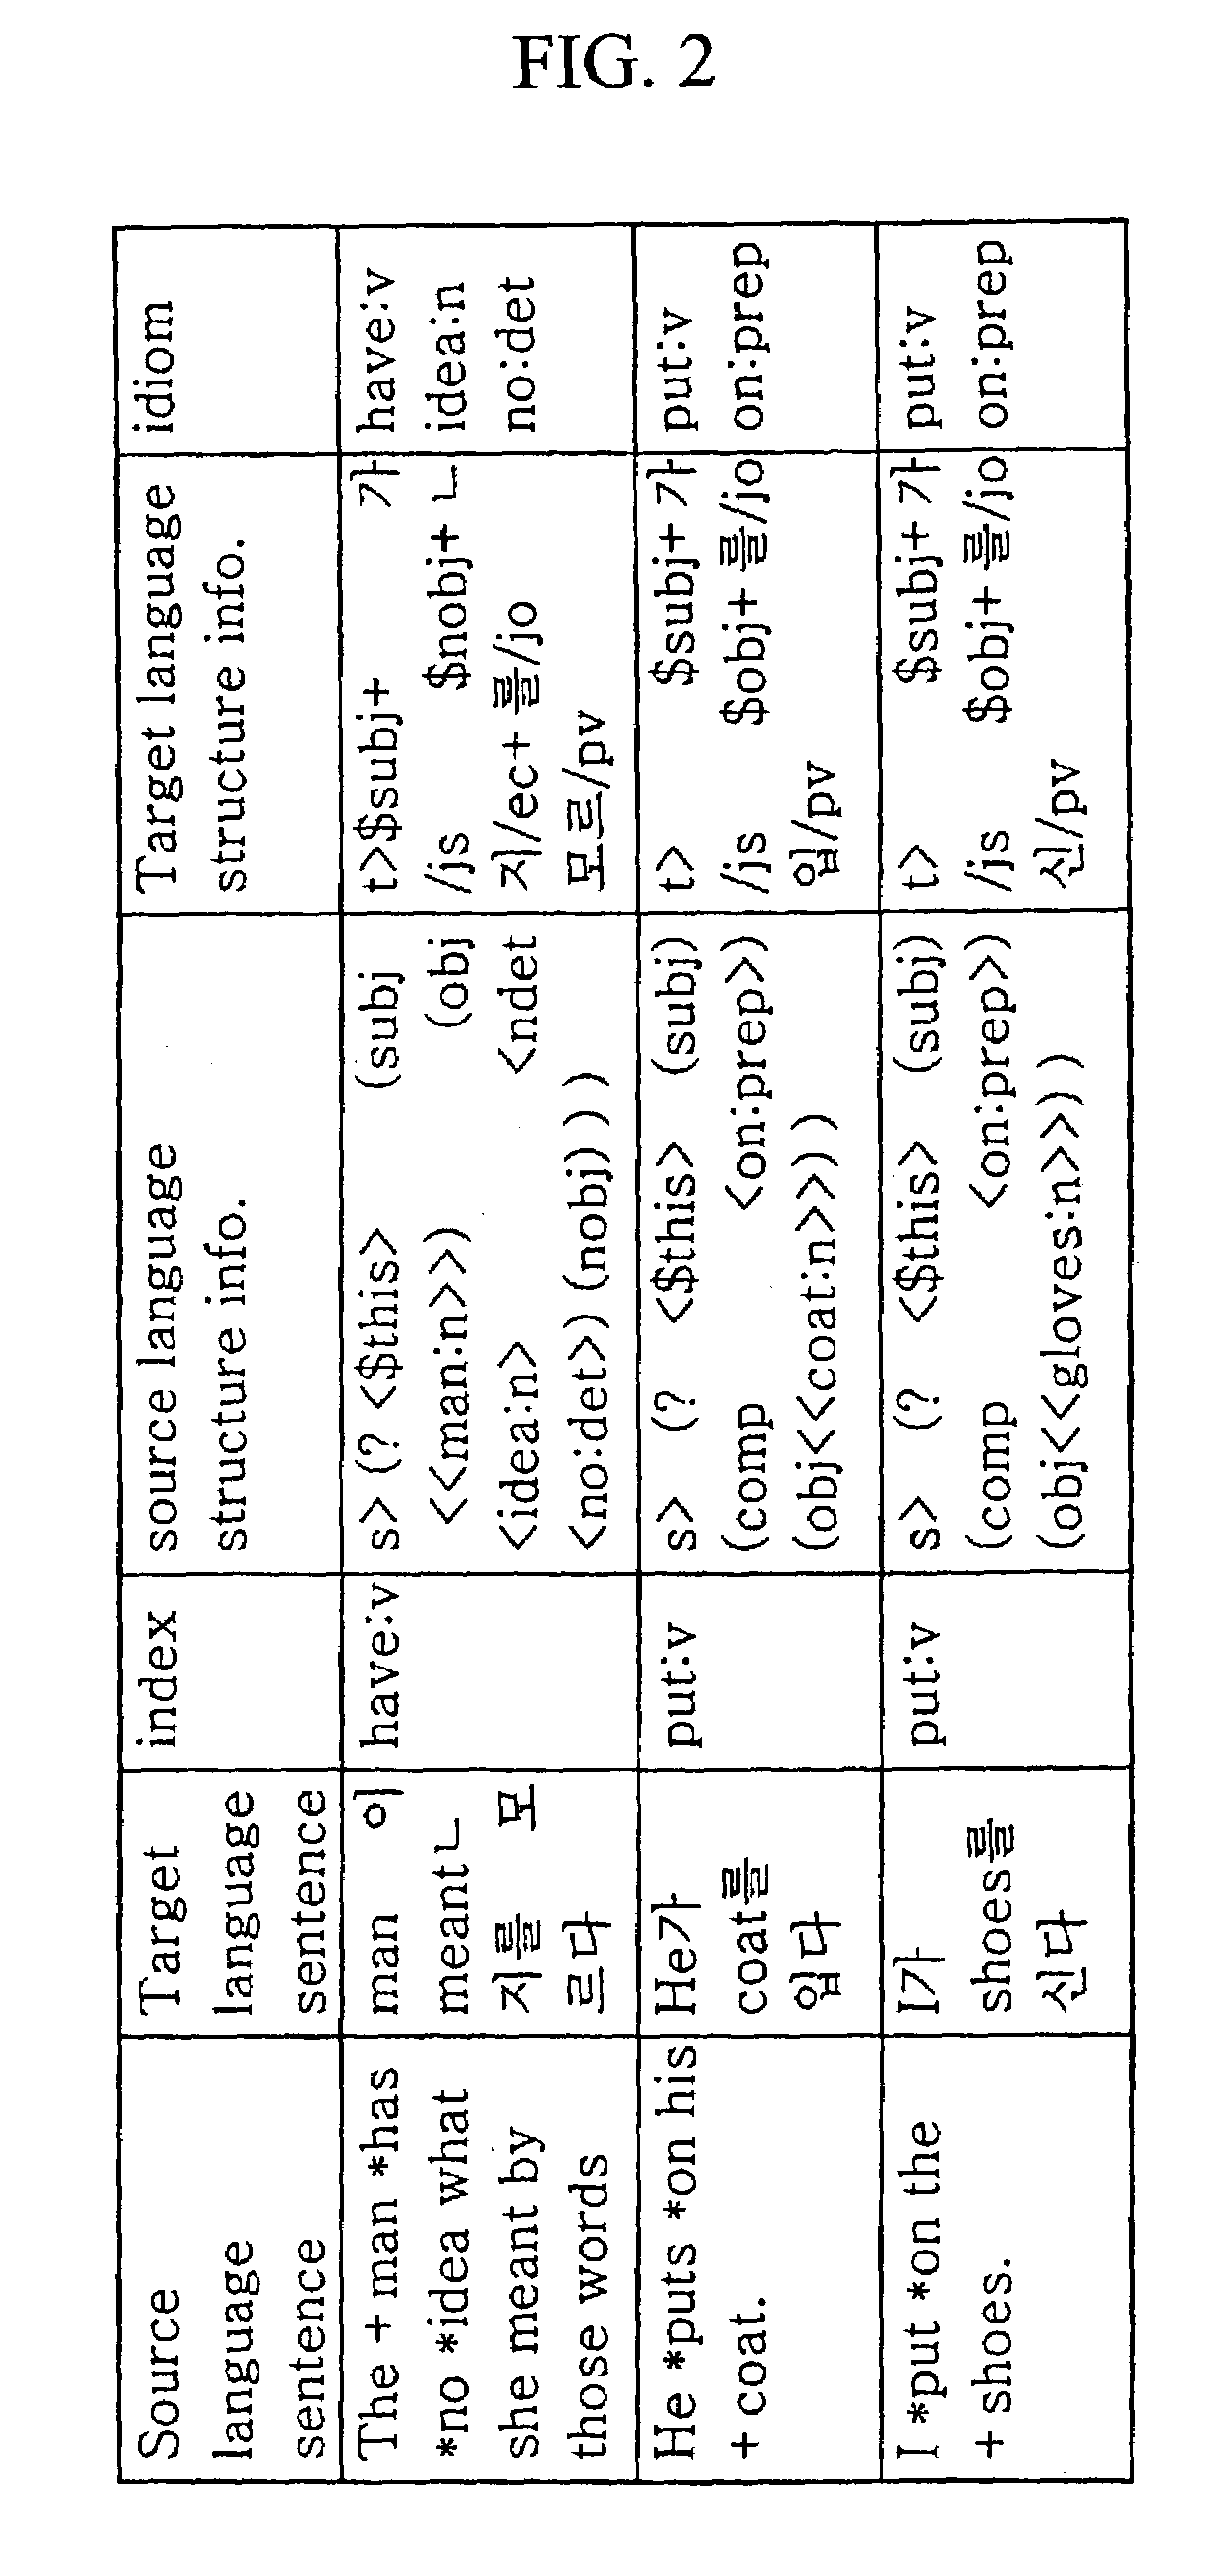 Method and apparatus for developing a transfer dictionary used in transfer-based machine translation system